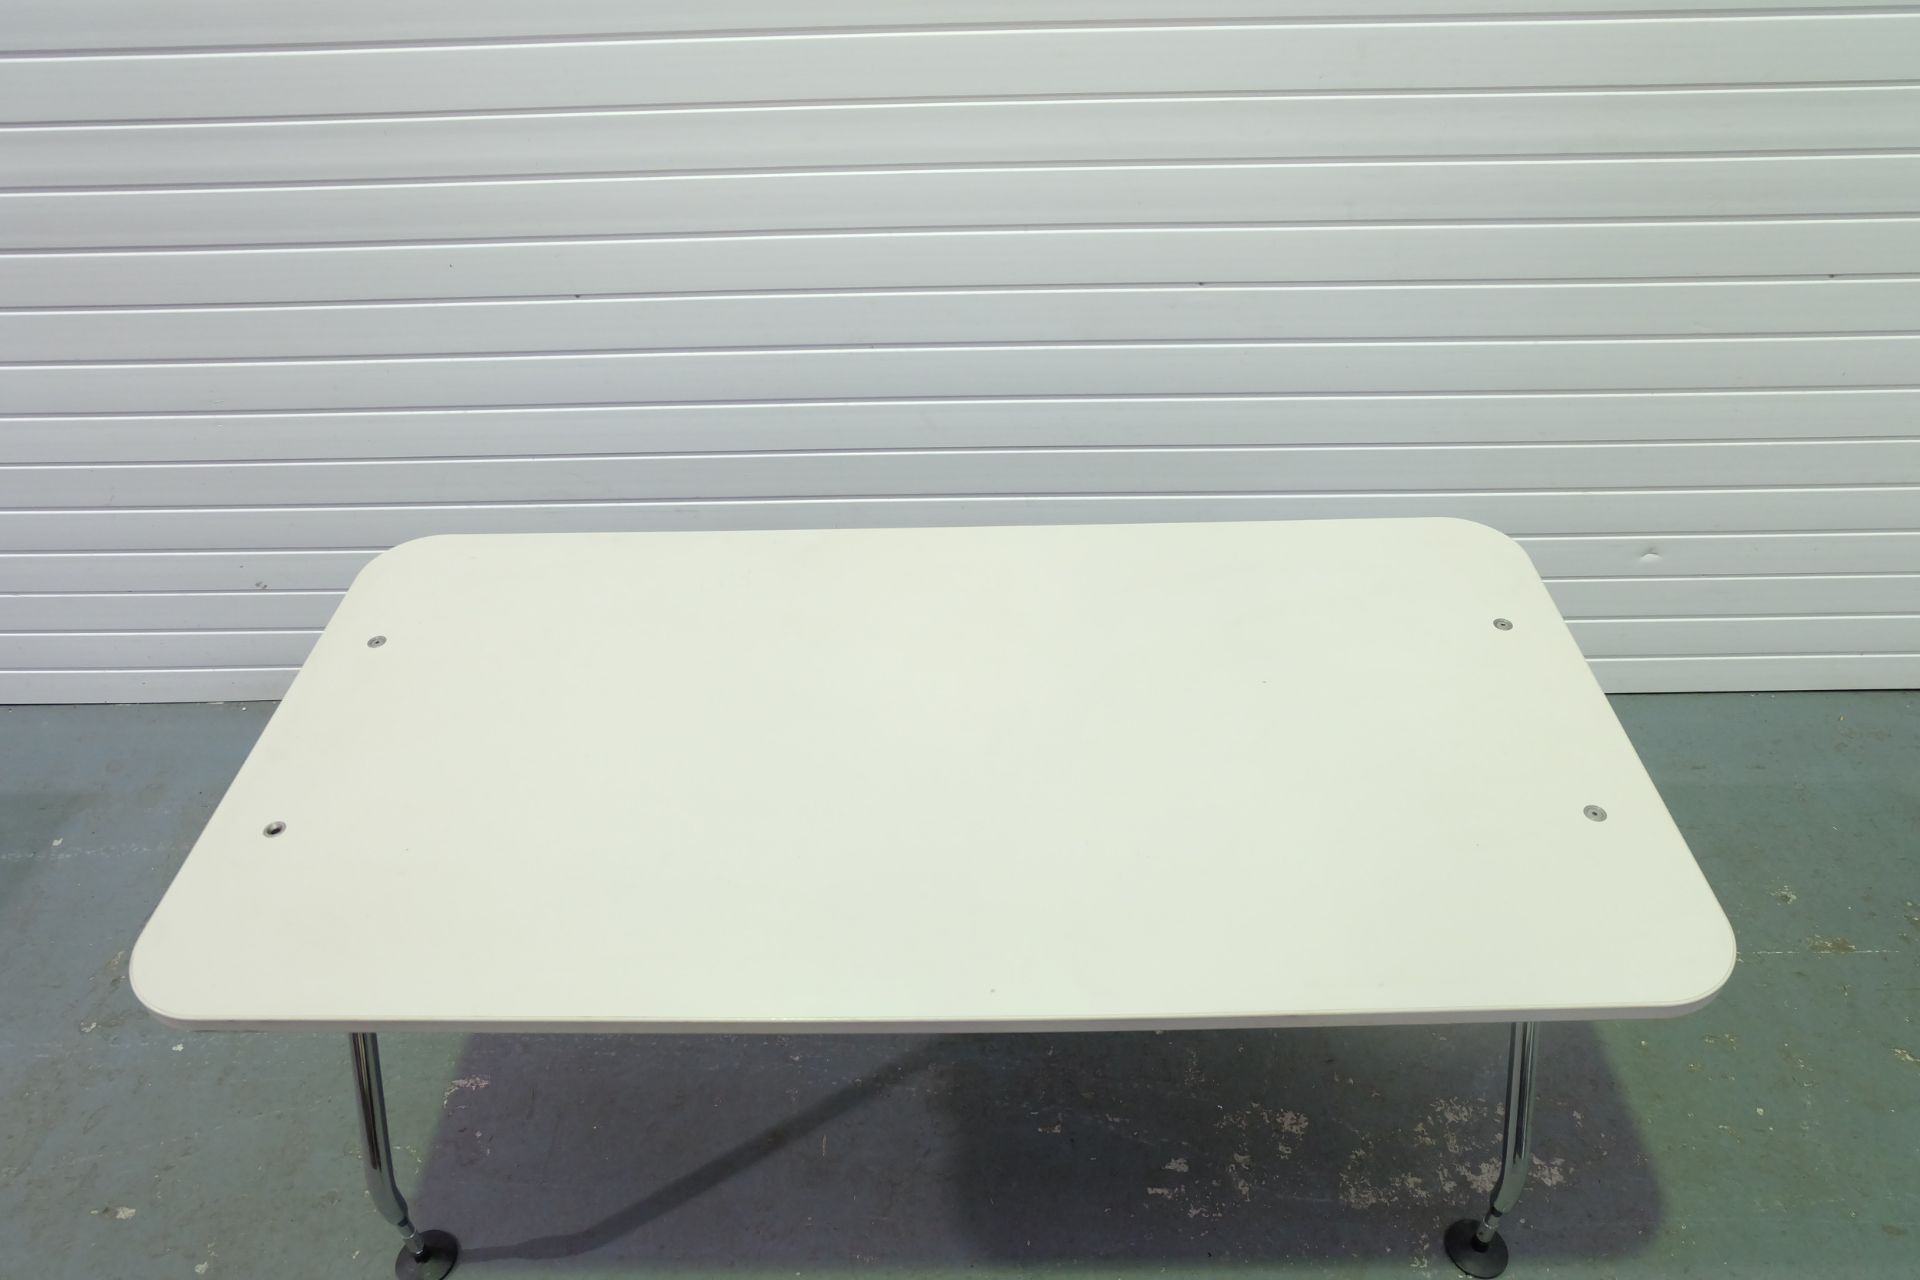 Table With Adjustable Chrome Legs. Size 1600mm x 800mm x 720mm High. - Image 2 of 3